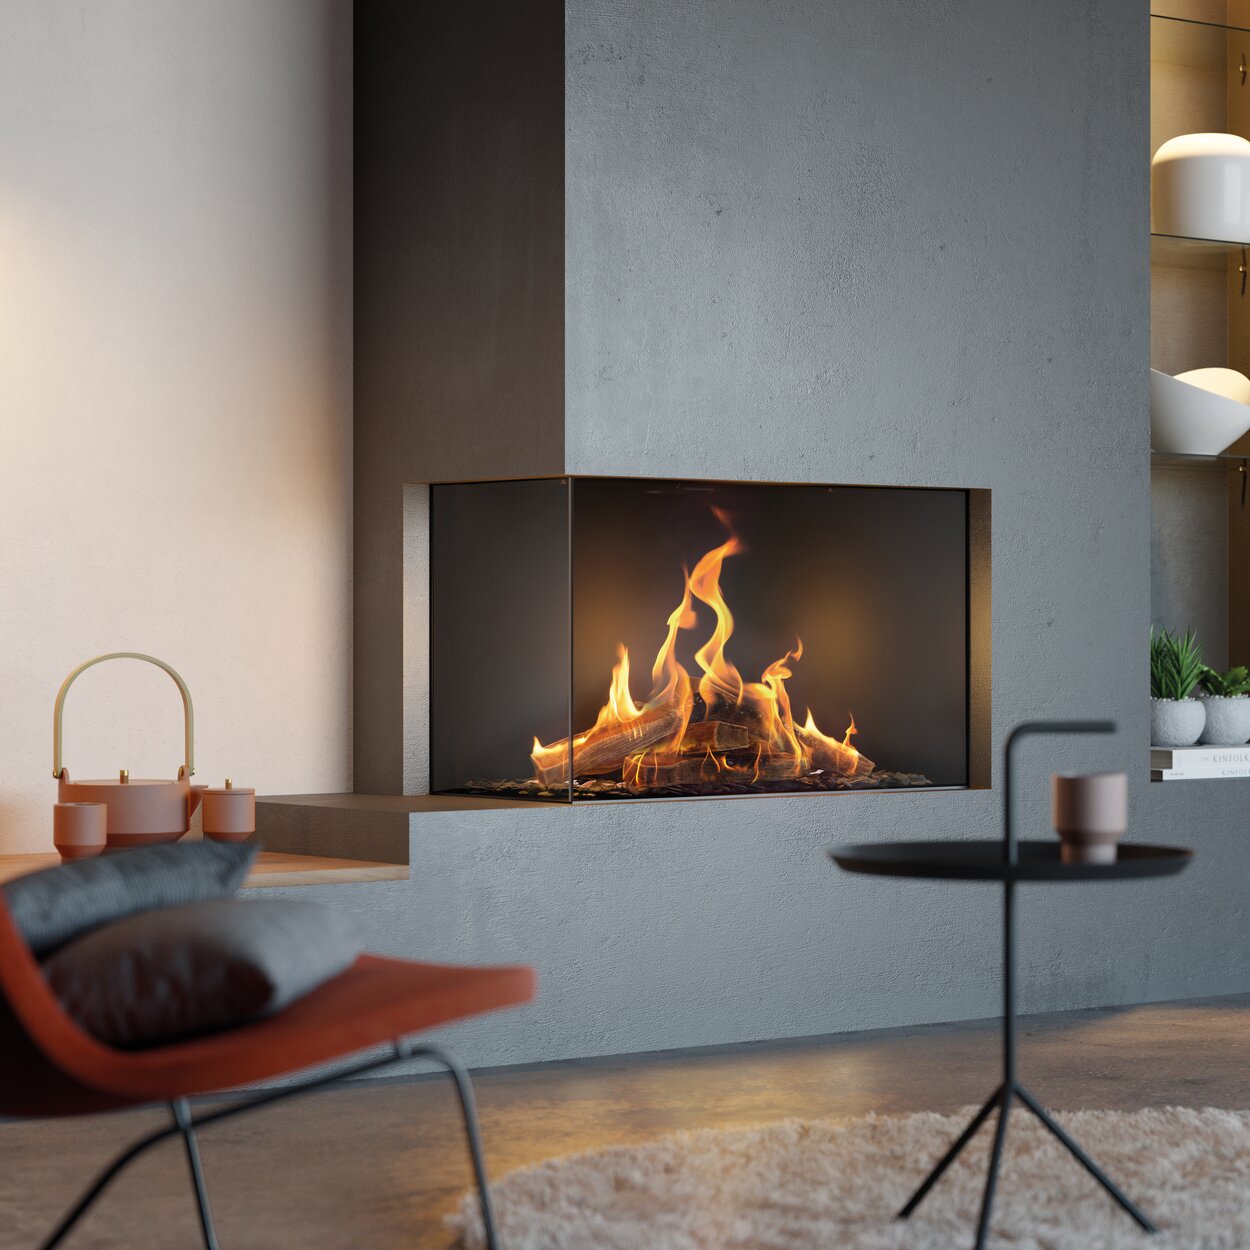 VISIO 90 LC gas fireplace as a corner fireplace on the left with authentic gas flames in front of minimalist armchairs in rust-red cover